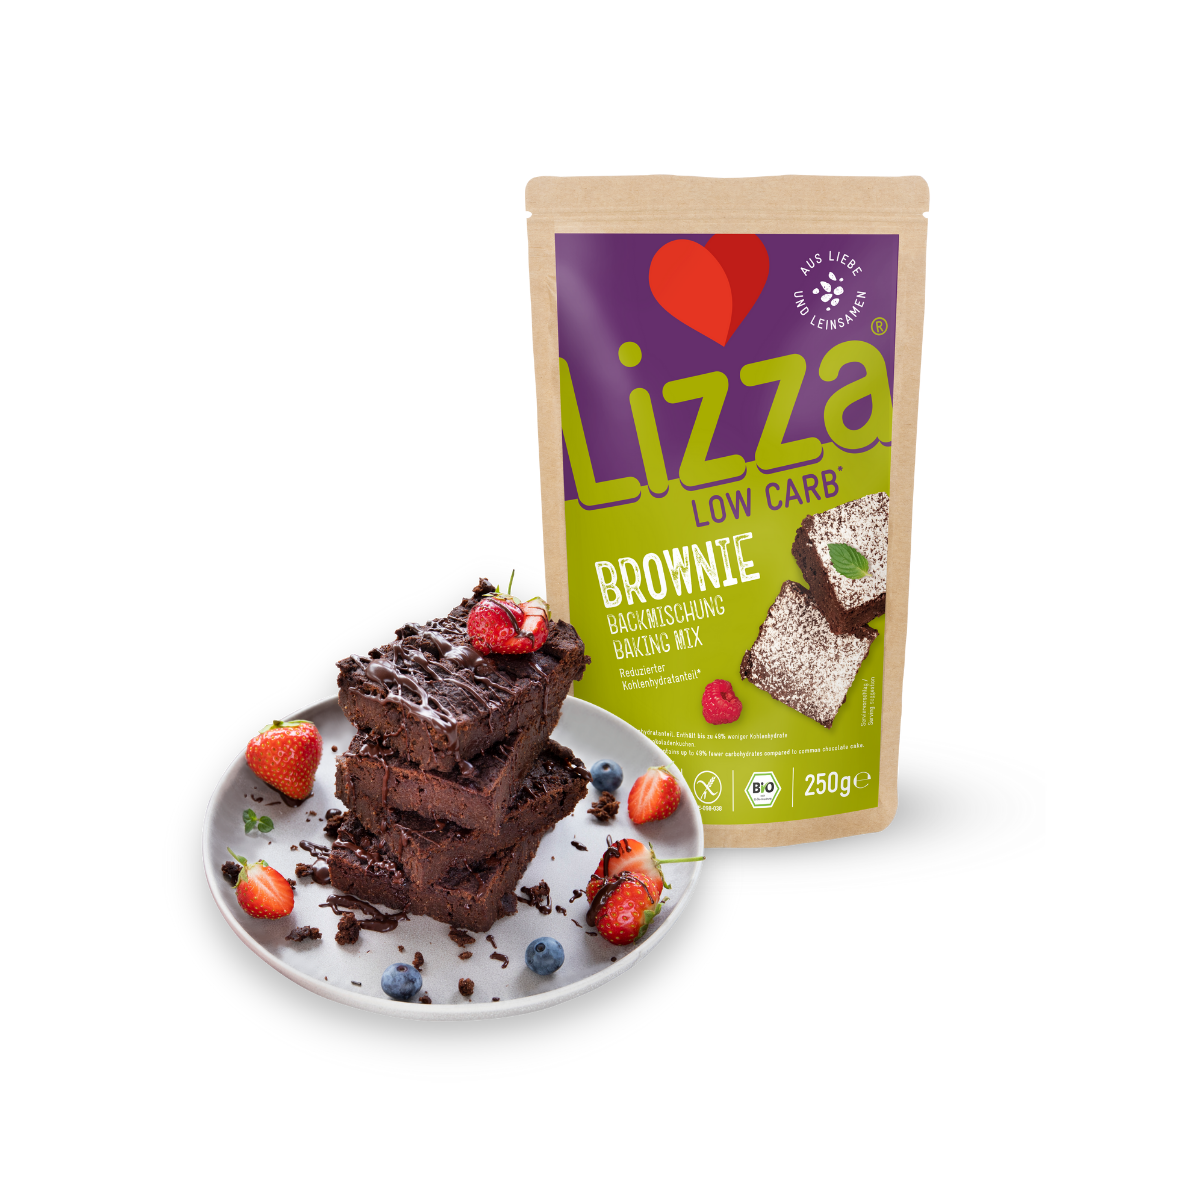 Lizza Low Carb Brownie Backmischung